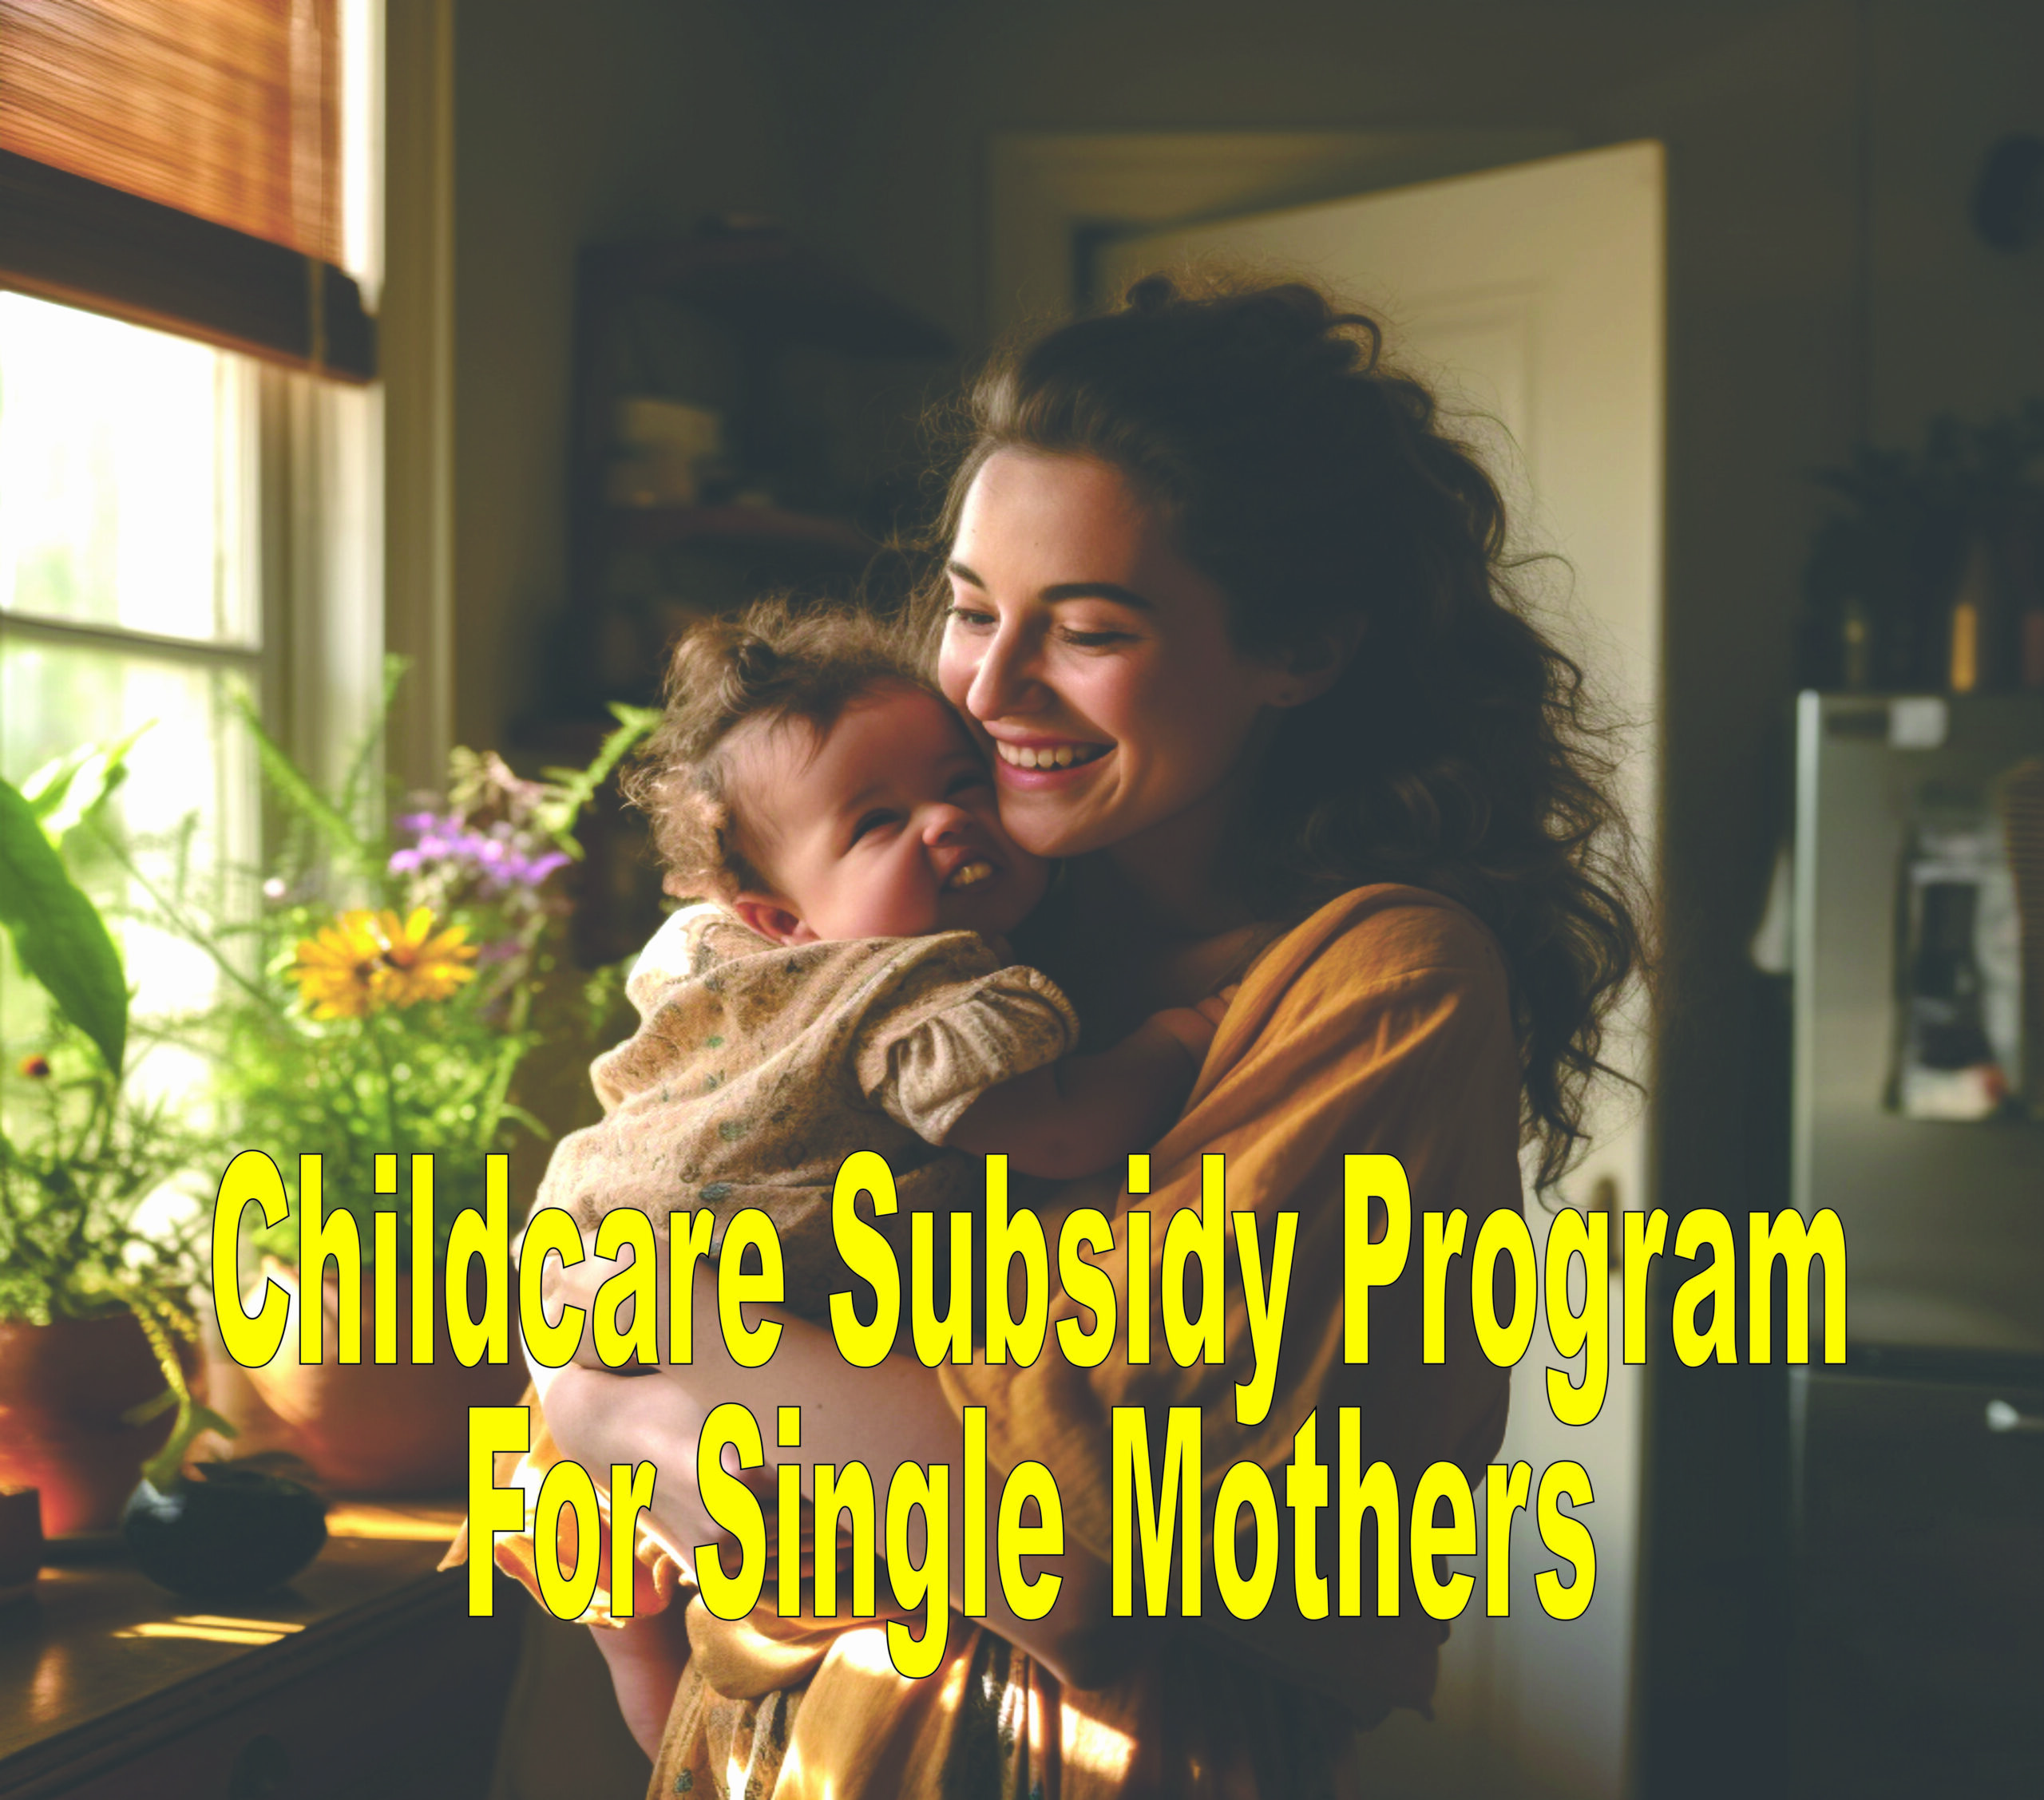 Childcare Subsidy Program For Single Mothers